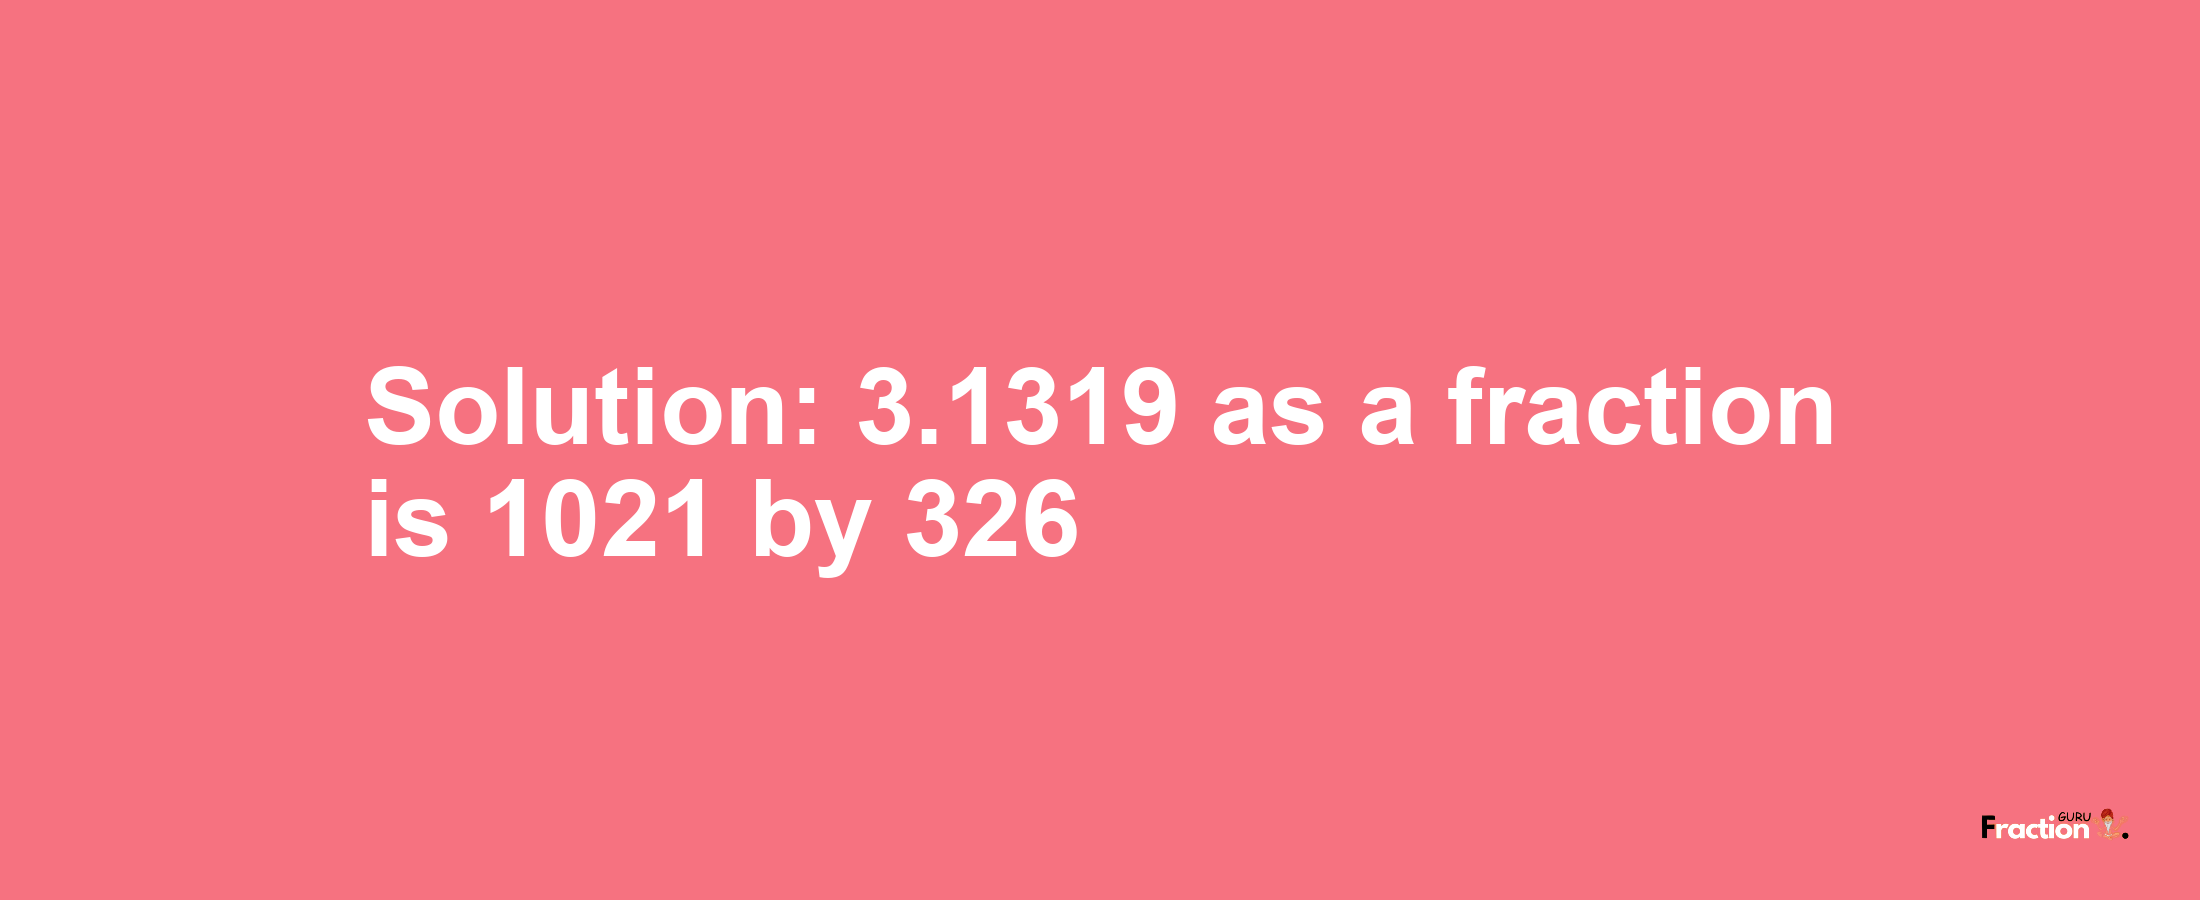 Solution:3.1319 as a fraction is 1021/326